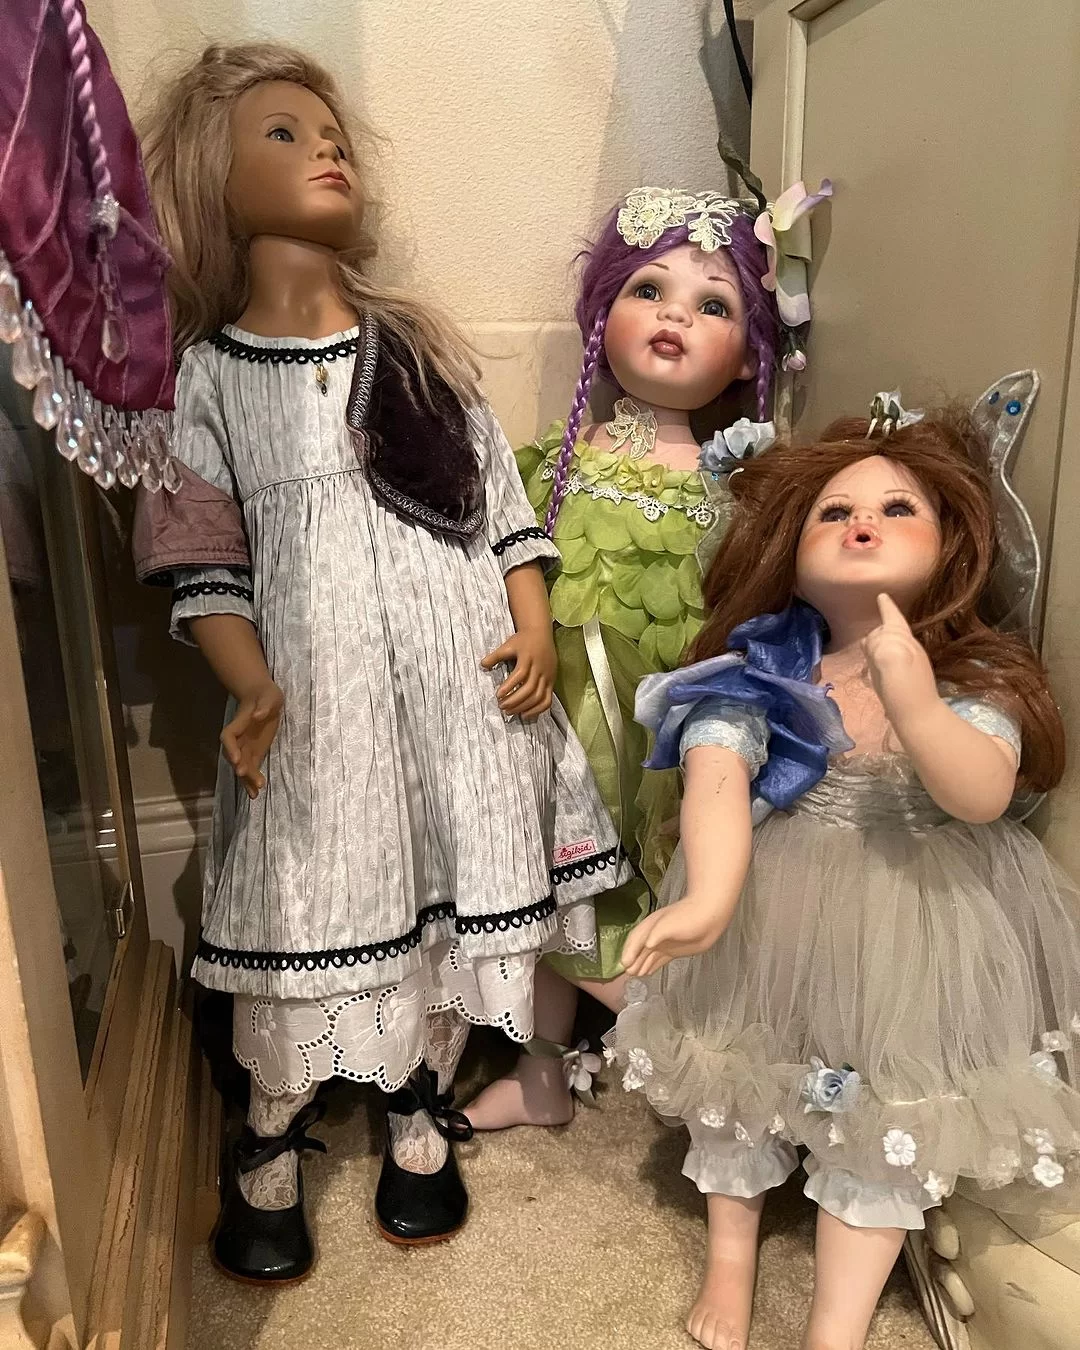 Lynne publishes supposed dolls mentioned by Britney (Reproduction/Instagram/lynnespears_rf) Lorena Bueri